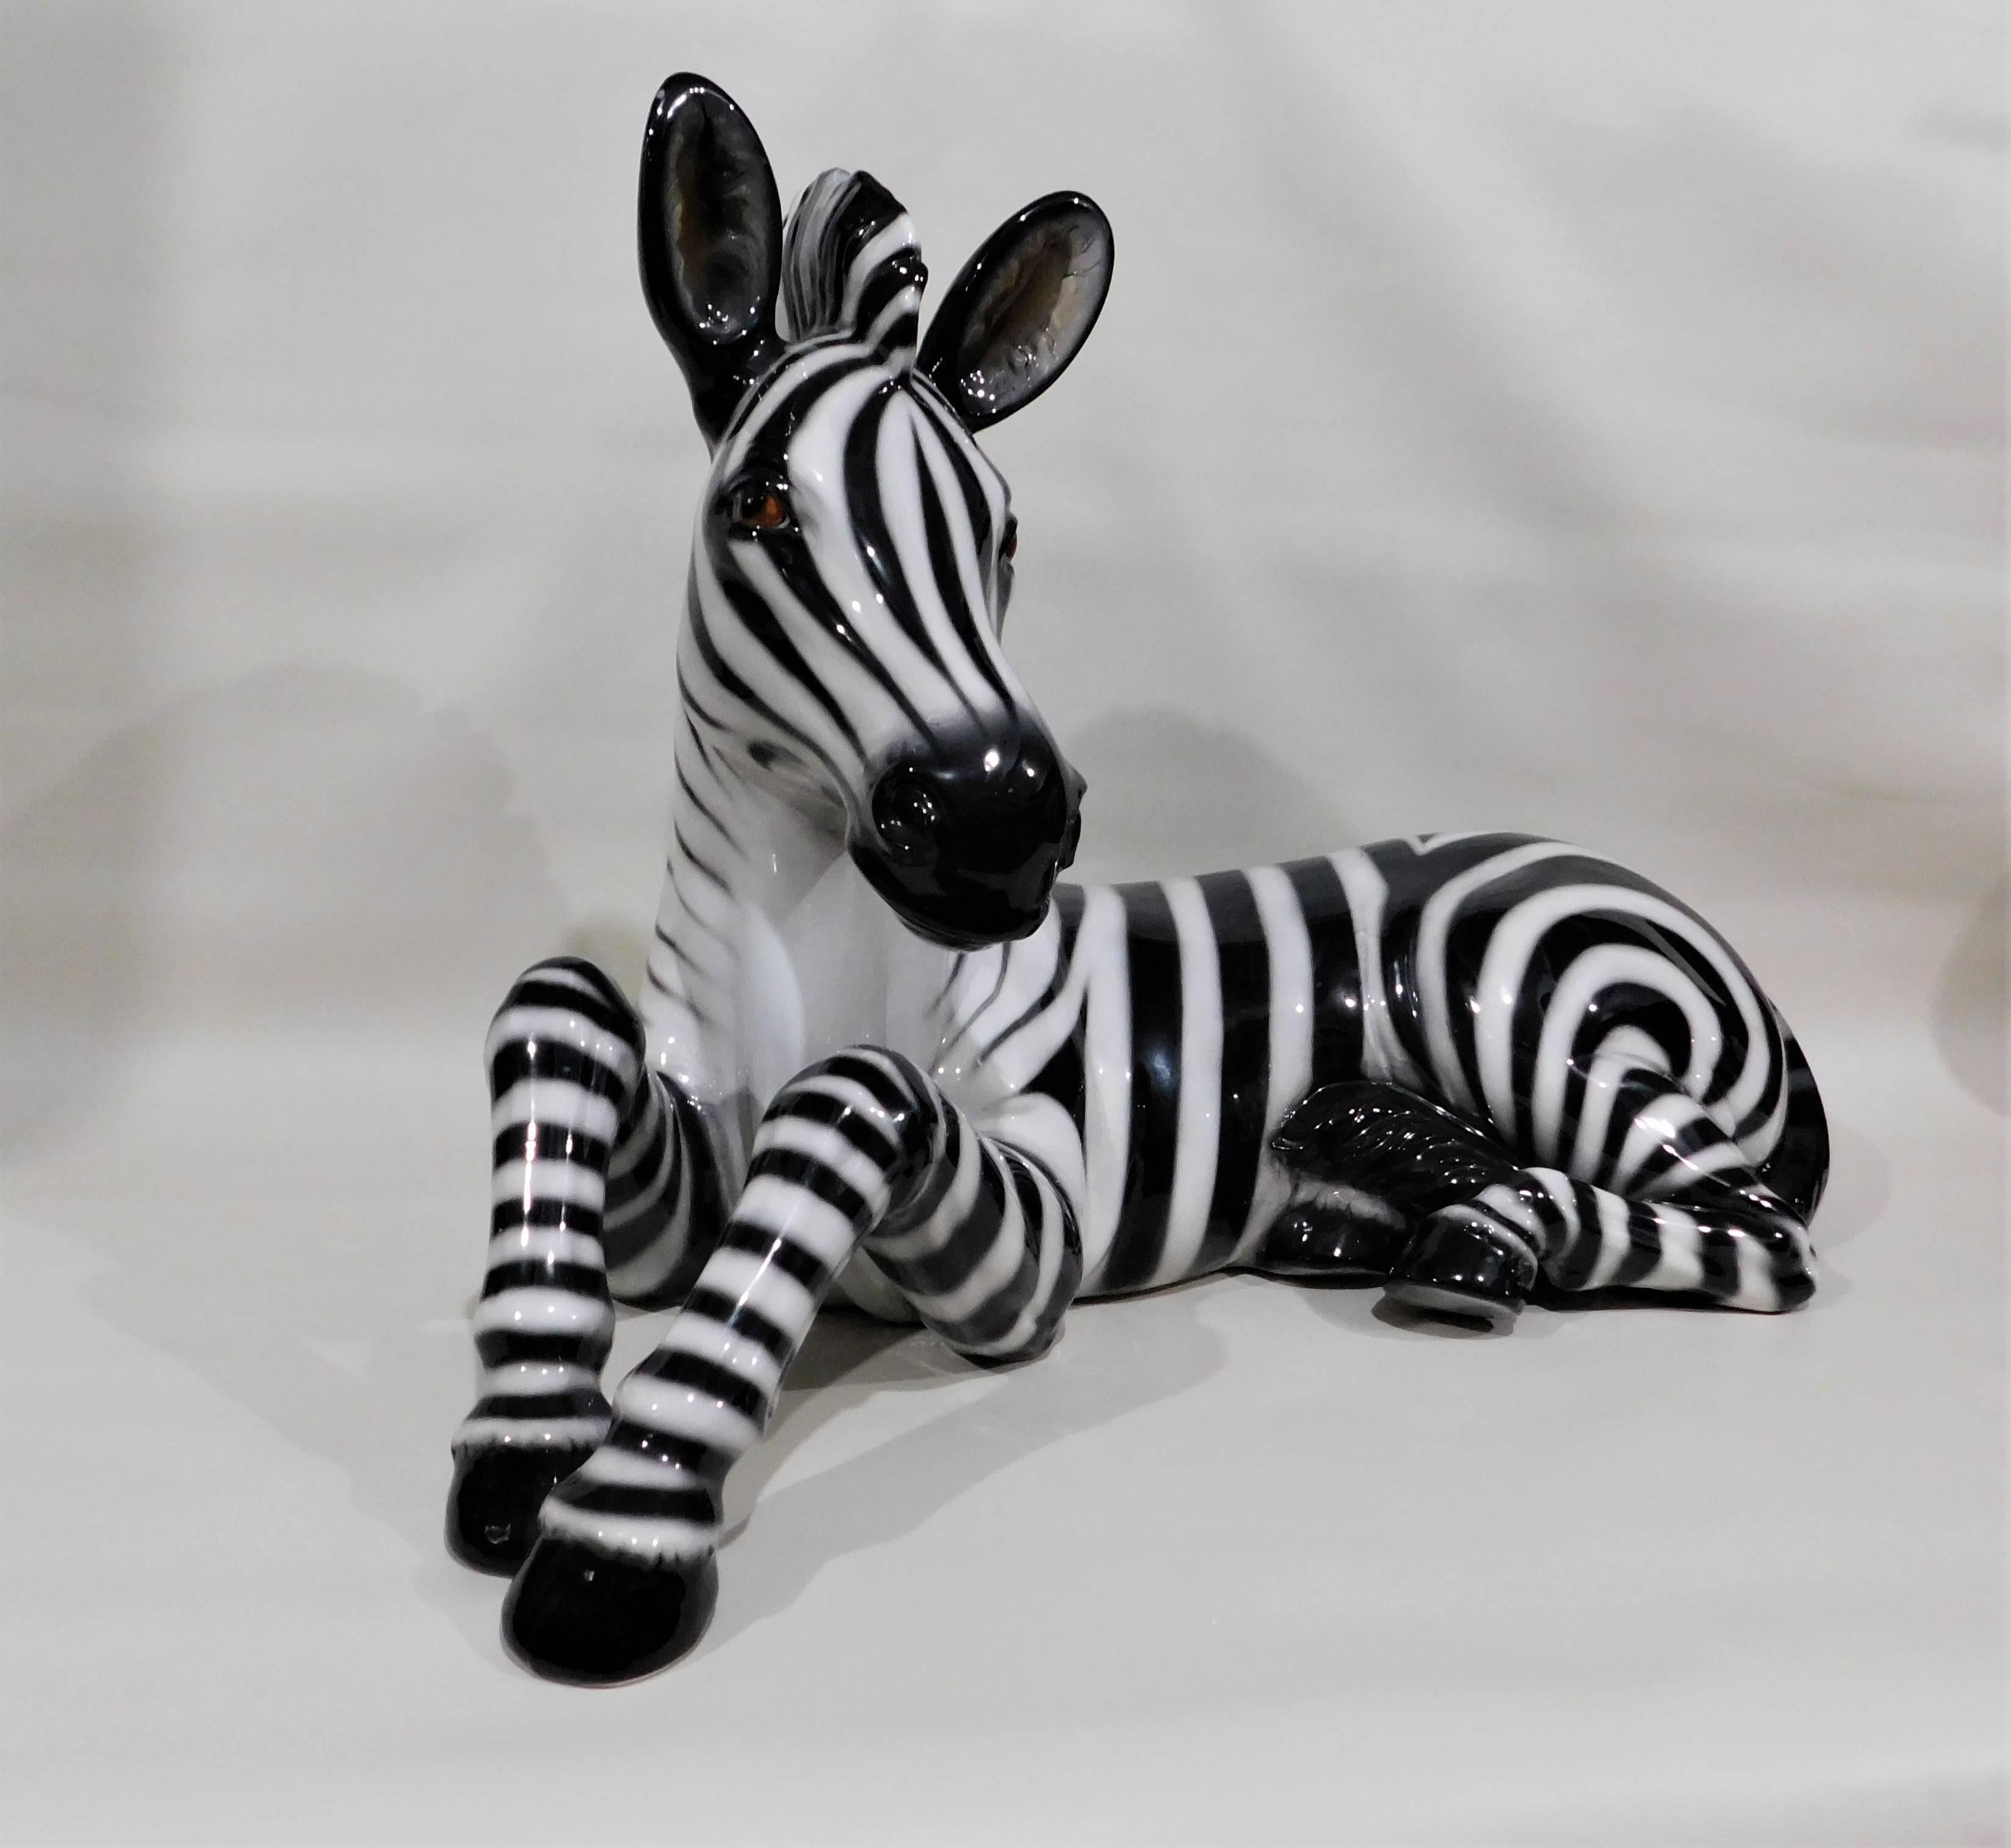 Circa 1960 handmade, painted and glazed in Italy, large mid-century modern ceramic zebra. This rare charming sculpture presents an accurate and detailed depiction of an elegant zebra.  Over two feet wide and nineteen inches high.